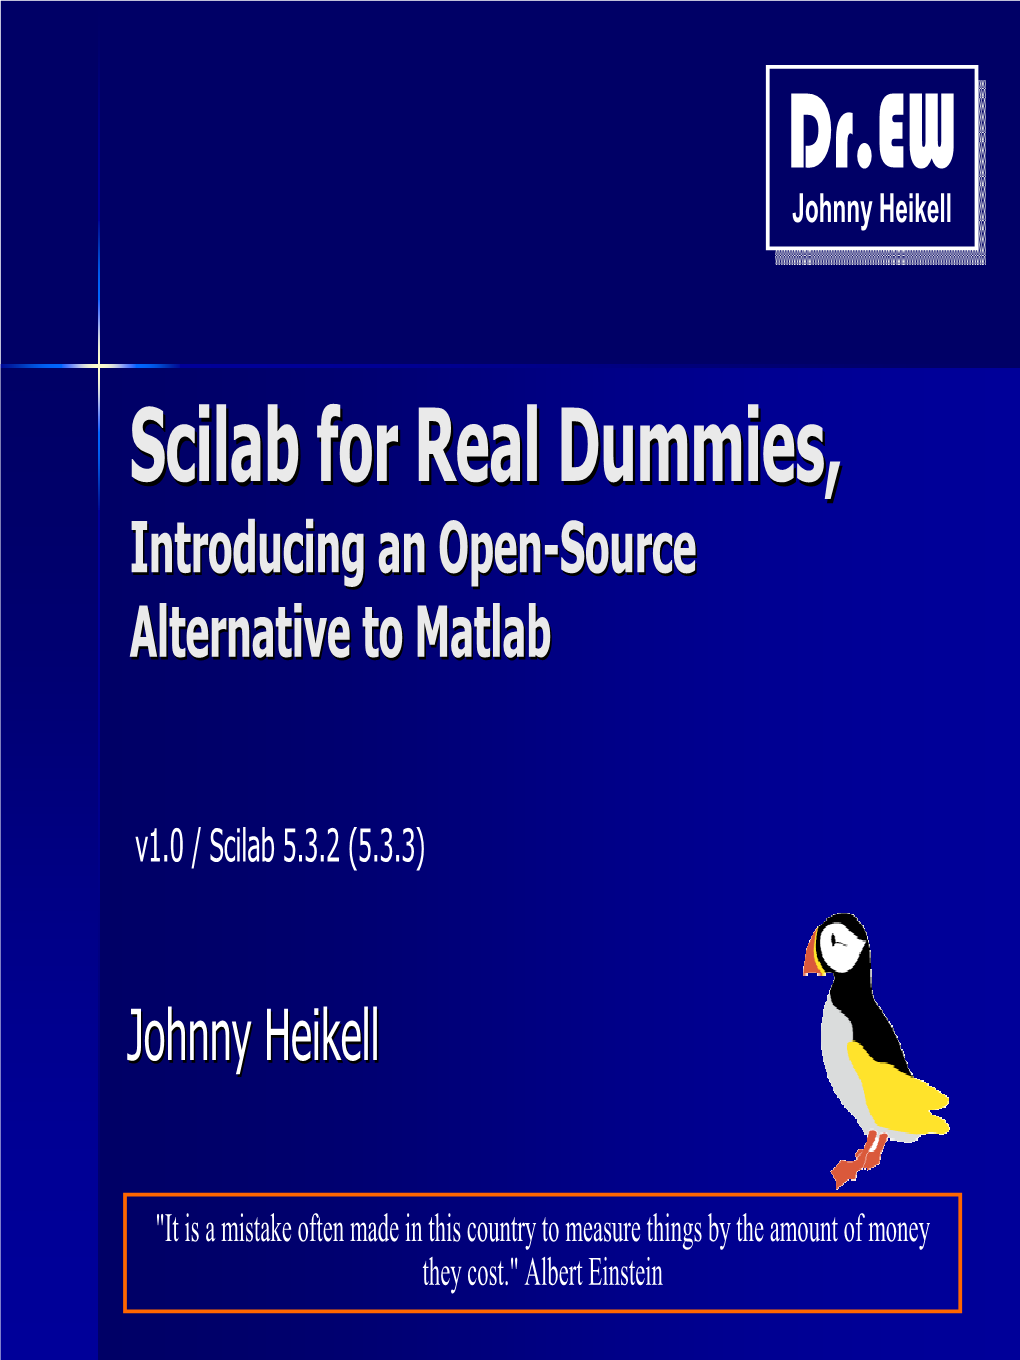 Scilab for Real Dummies (PDF)